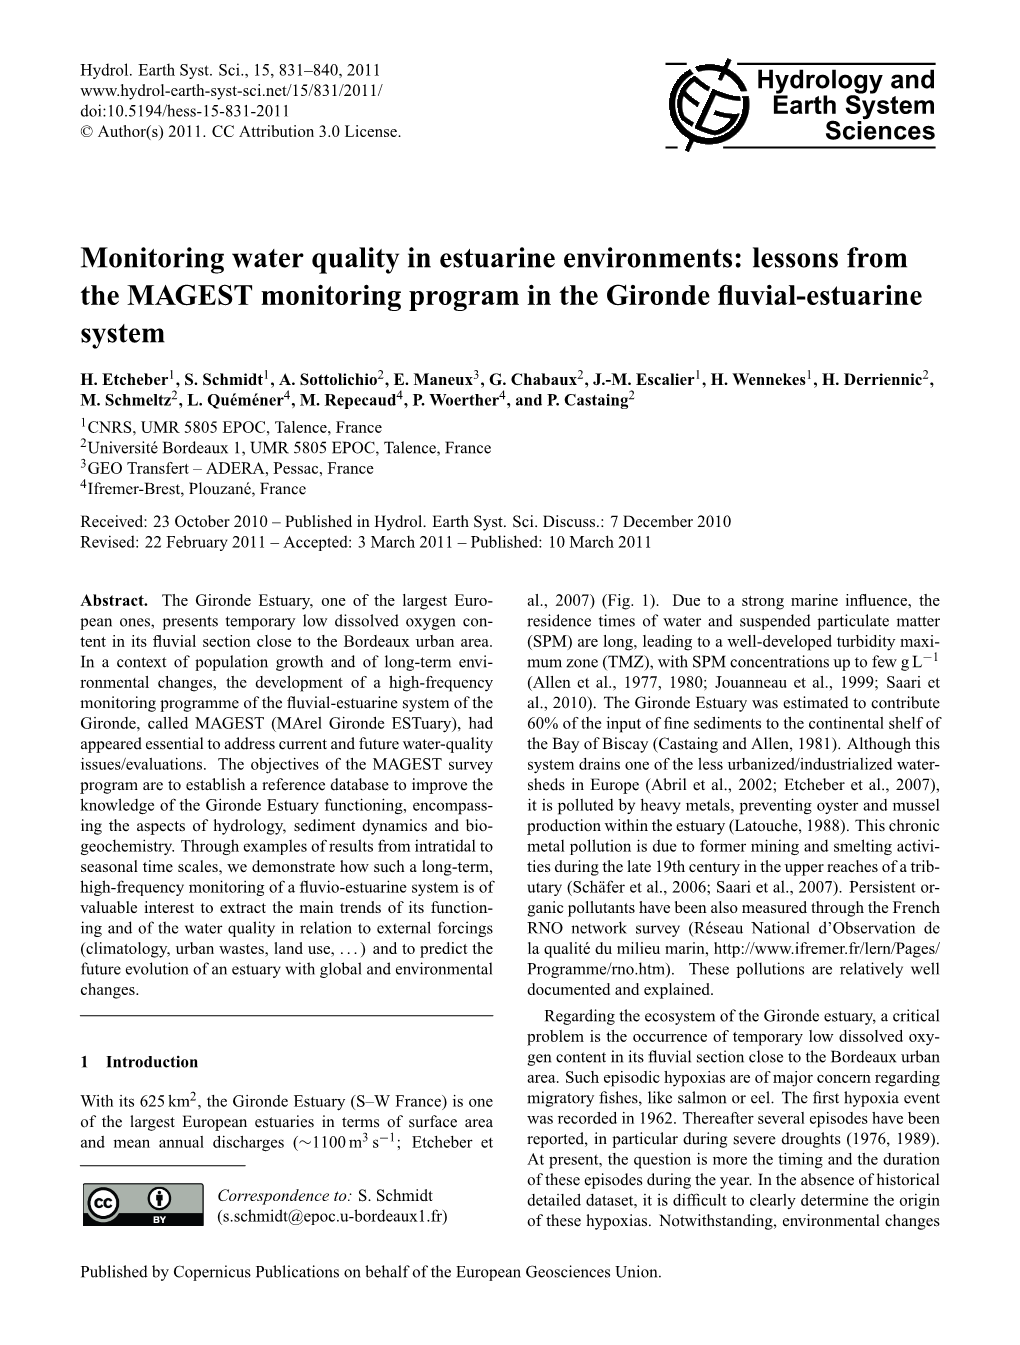 Monitoring Water Quality in Estuarine Environments: Lessons from the MAGEST Monitoring Program in the Gironde ﬂuvial-Estuarine System